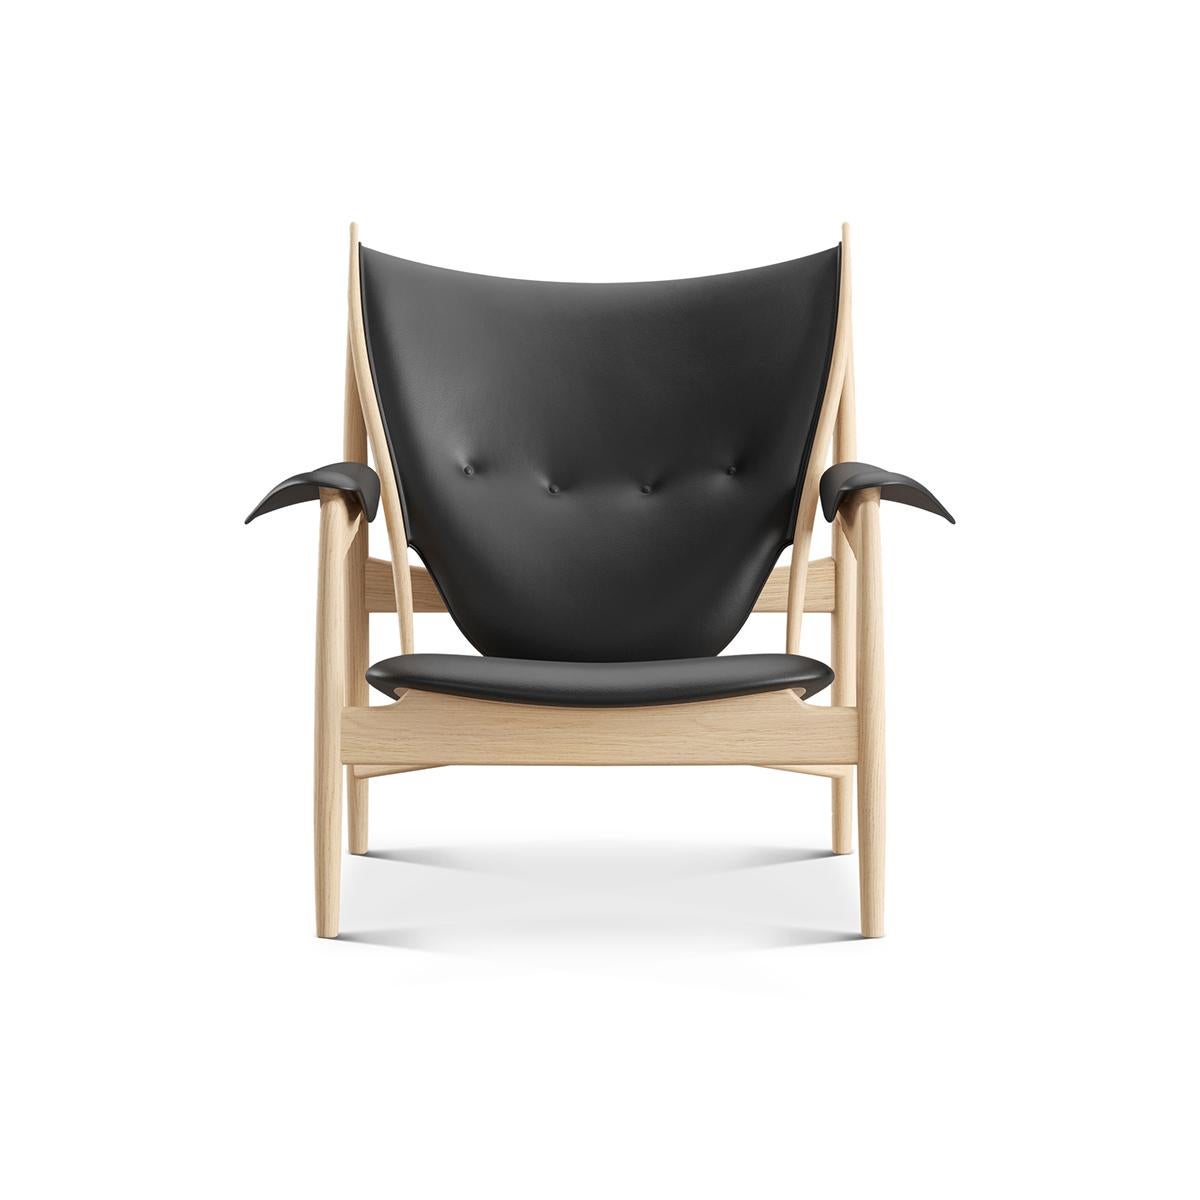 Chair designed by Finn Juhl in 1949, relaunched in 2002.
Manufactured by House of Finn Juhl in Denmark.

The iconic Chieftain Chair is one of Finn Juhl’s absolute masterpieces, representing the peak of his career as a furniture designer. At its